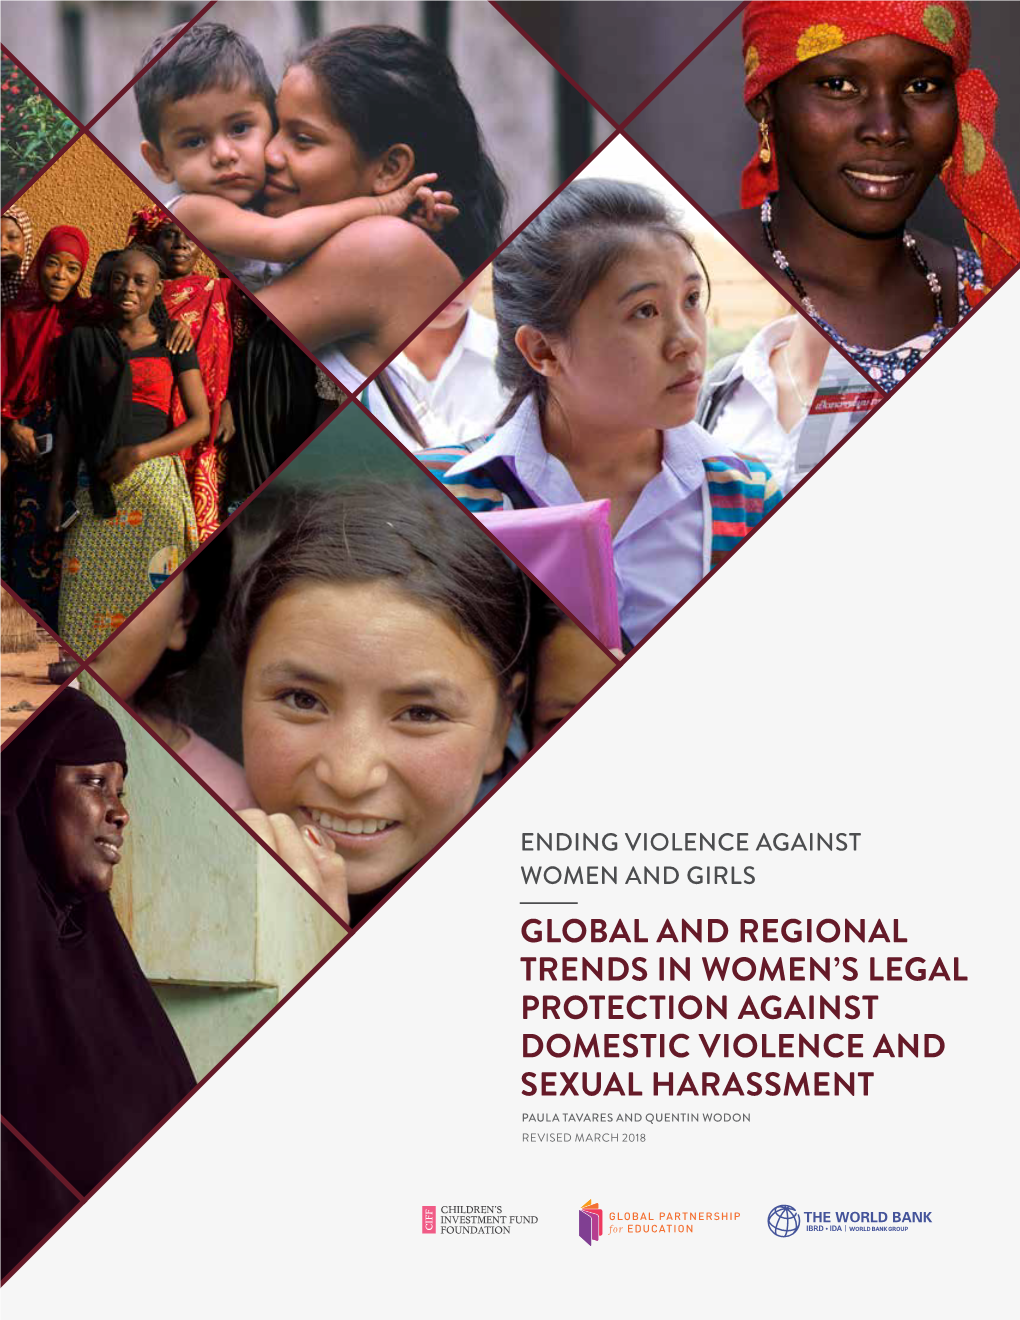 Global and Regional Trends in Women's Legal Protection Against